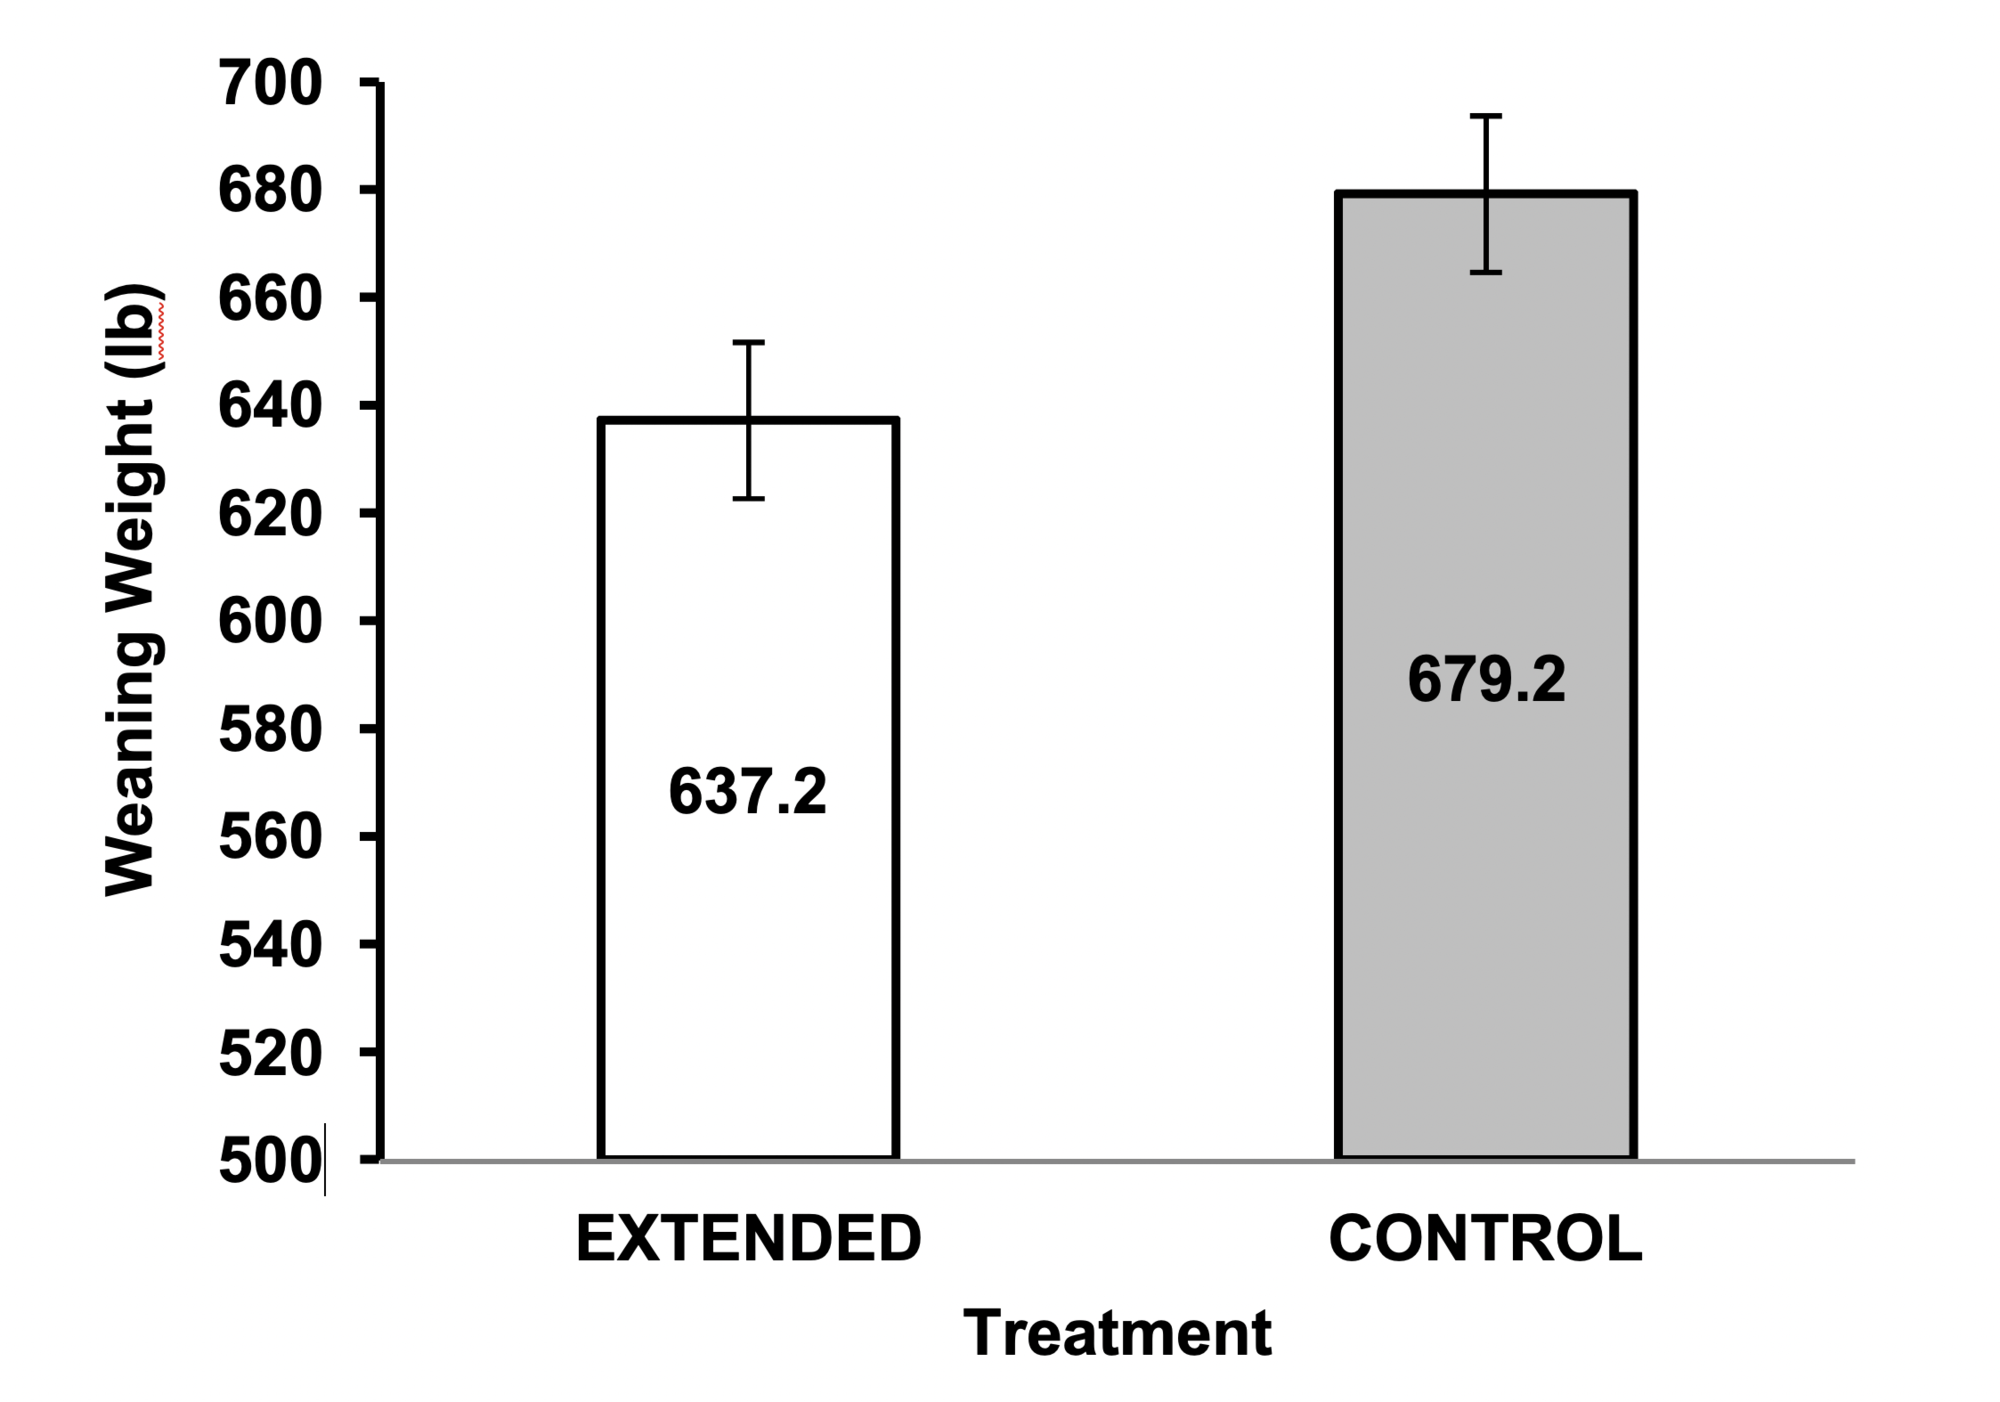 A bar graph shows the calf weaning weight for extended season grazing (637.2) and the control group (679.2).